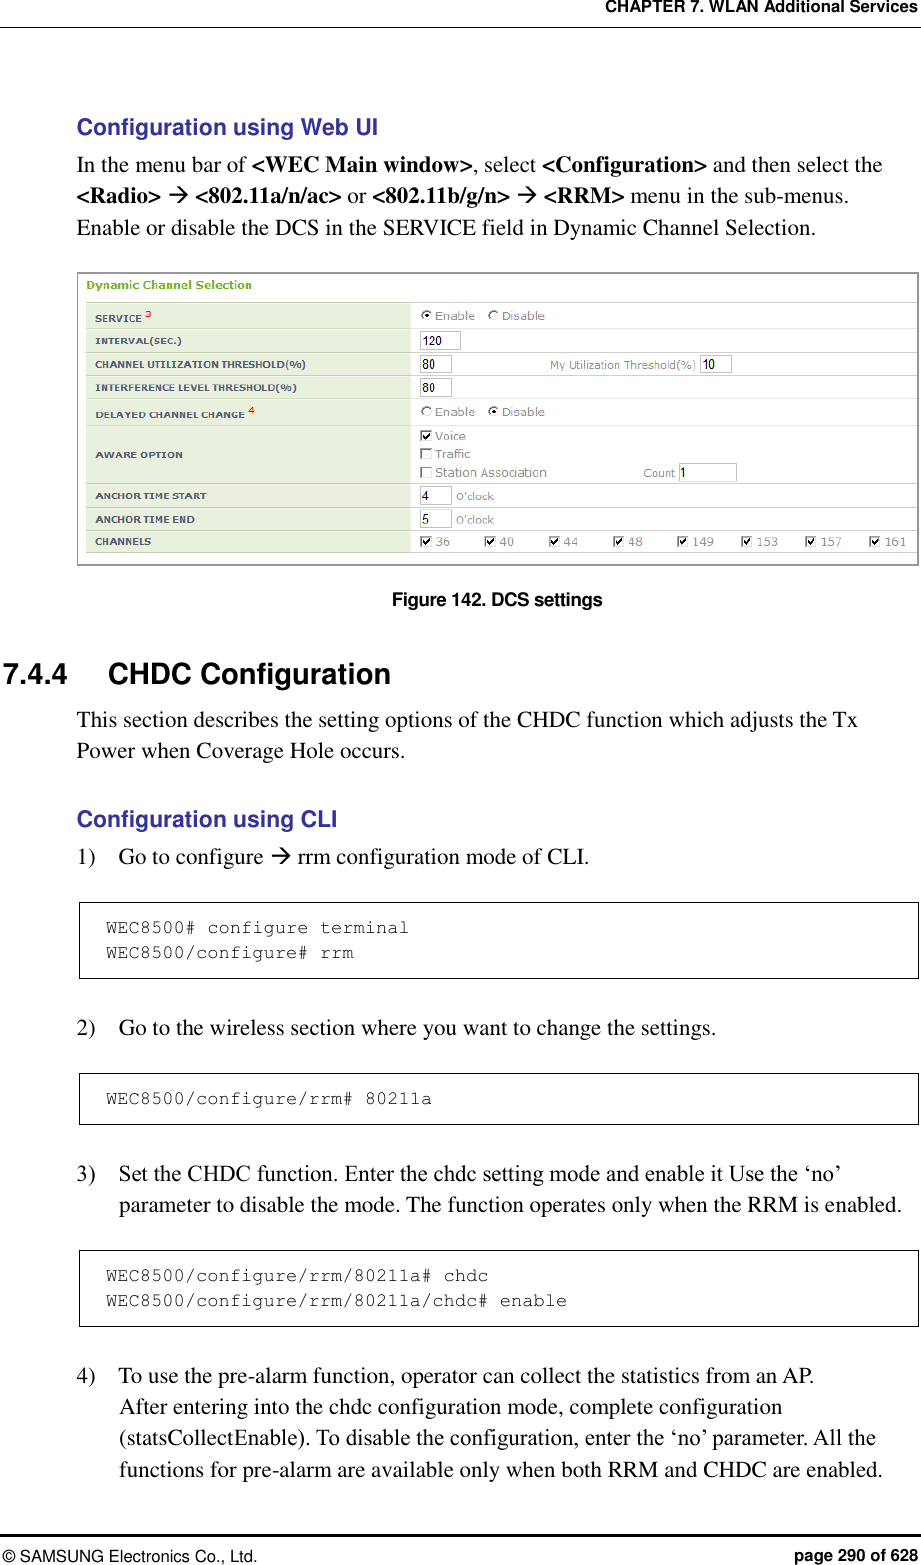 CHAPTER 7. WLAN Additional Services ©  SAMSUNG Electronics Co., Ltd.  page 290 of 628 Configuration using Web UI In the menu bar of &lt;WEC Main window&gt;, select &lt;Configuration&gt; and then select the &lt;Radio&gt;  &lt;802.11a/n/ac&gt; or &lt;802.11b/g/n&gt;  &lt;RRM&gt; menu in the sub-menus. Enable or disable the DCS in the SERVICE field in Dynamic Channel Selection.  Figure 142. DCS settings  7.4.4  CHDC Configuration This section describes the setting options of the CHDC function which adjusts the Tx Power when Coverage Hole occurs.  Configuration using CLI 1)    Go to configure  rrm configuration mode of CLI.  WEC8500# configure terminal WEC8500/configure# rrm  2)    Go to the wireless section where you want to change the settings.  WEC8500/configure/rrm# 80211a  3)    Set the CHDC function. Enter the chdc setting mode and enable it Use the ‘no’ parameter to disable the mode. The function operates only when the RRM is enabled.  WEC8500/configure/rrm/80211a# chdc WEC8500/configure/rrm/80211a/chdc# enable  4)    To use the pre-alarm function, operator can collect the statistics from an AP.   After entering into the chdc configuration mode, complete configuration (statsCollectEnable). To disable the configuration, enter the ‘no’ parameter. All the functions for pre-alarm are available only when both RRM and CHDC are enabled. 